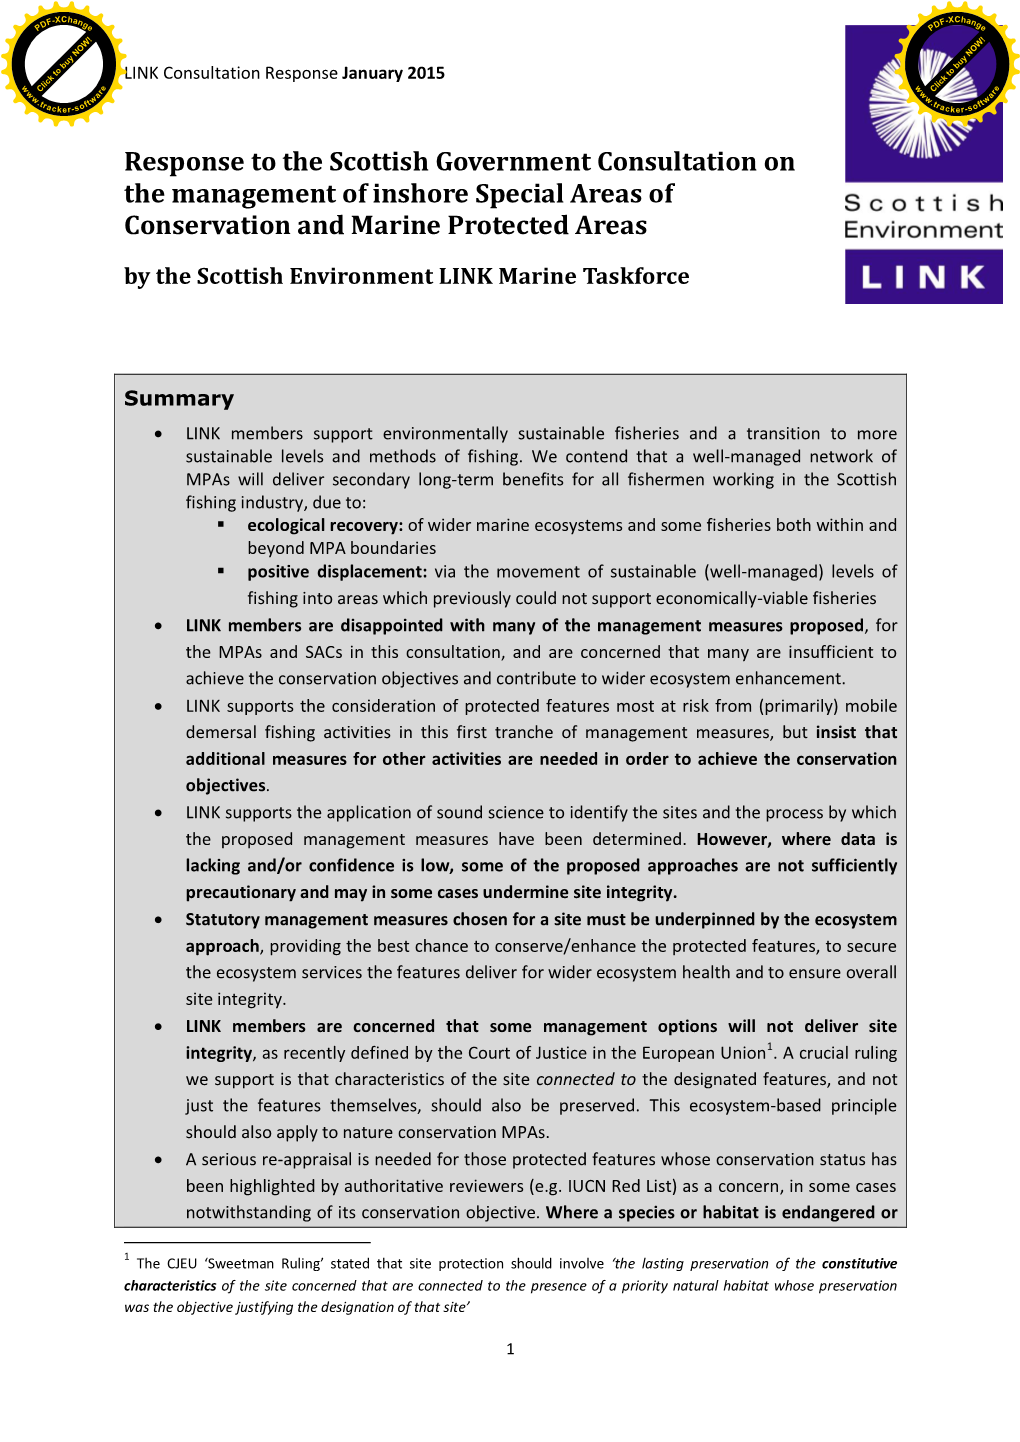 Response to the Scottish Government Consultation on the Management of Inshore Special Areas of Conservation and Marine Protected Areas